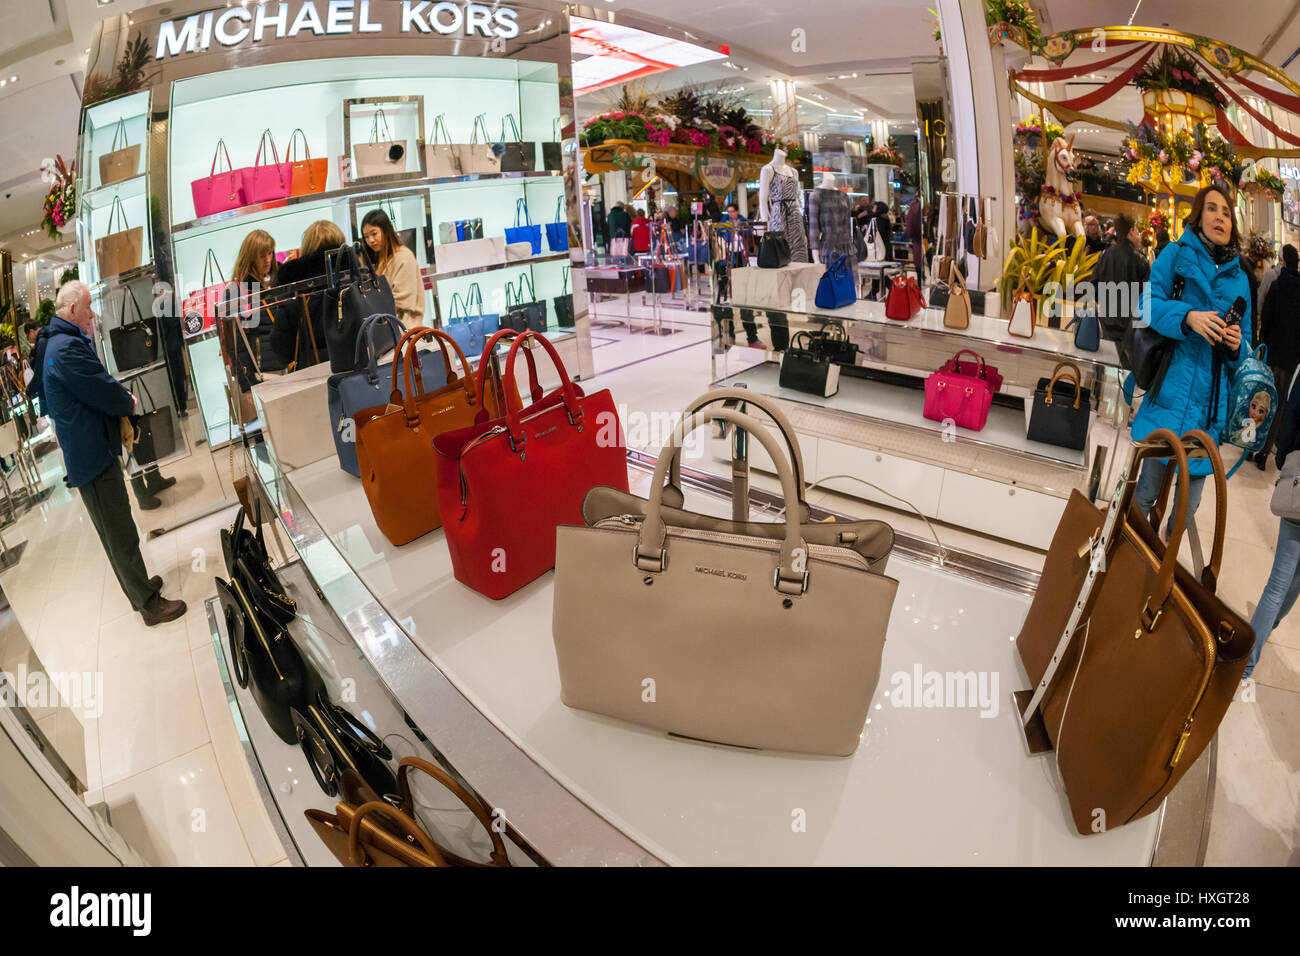 Shoppers browse Michael Kors handbags in the Macy's Herald Square flagship store on Sunday, March 26, 2017. (© Richard B. Levine) Stock Photo